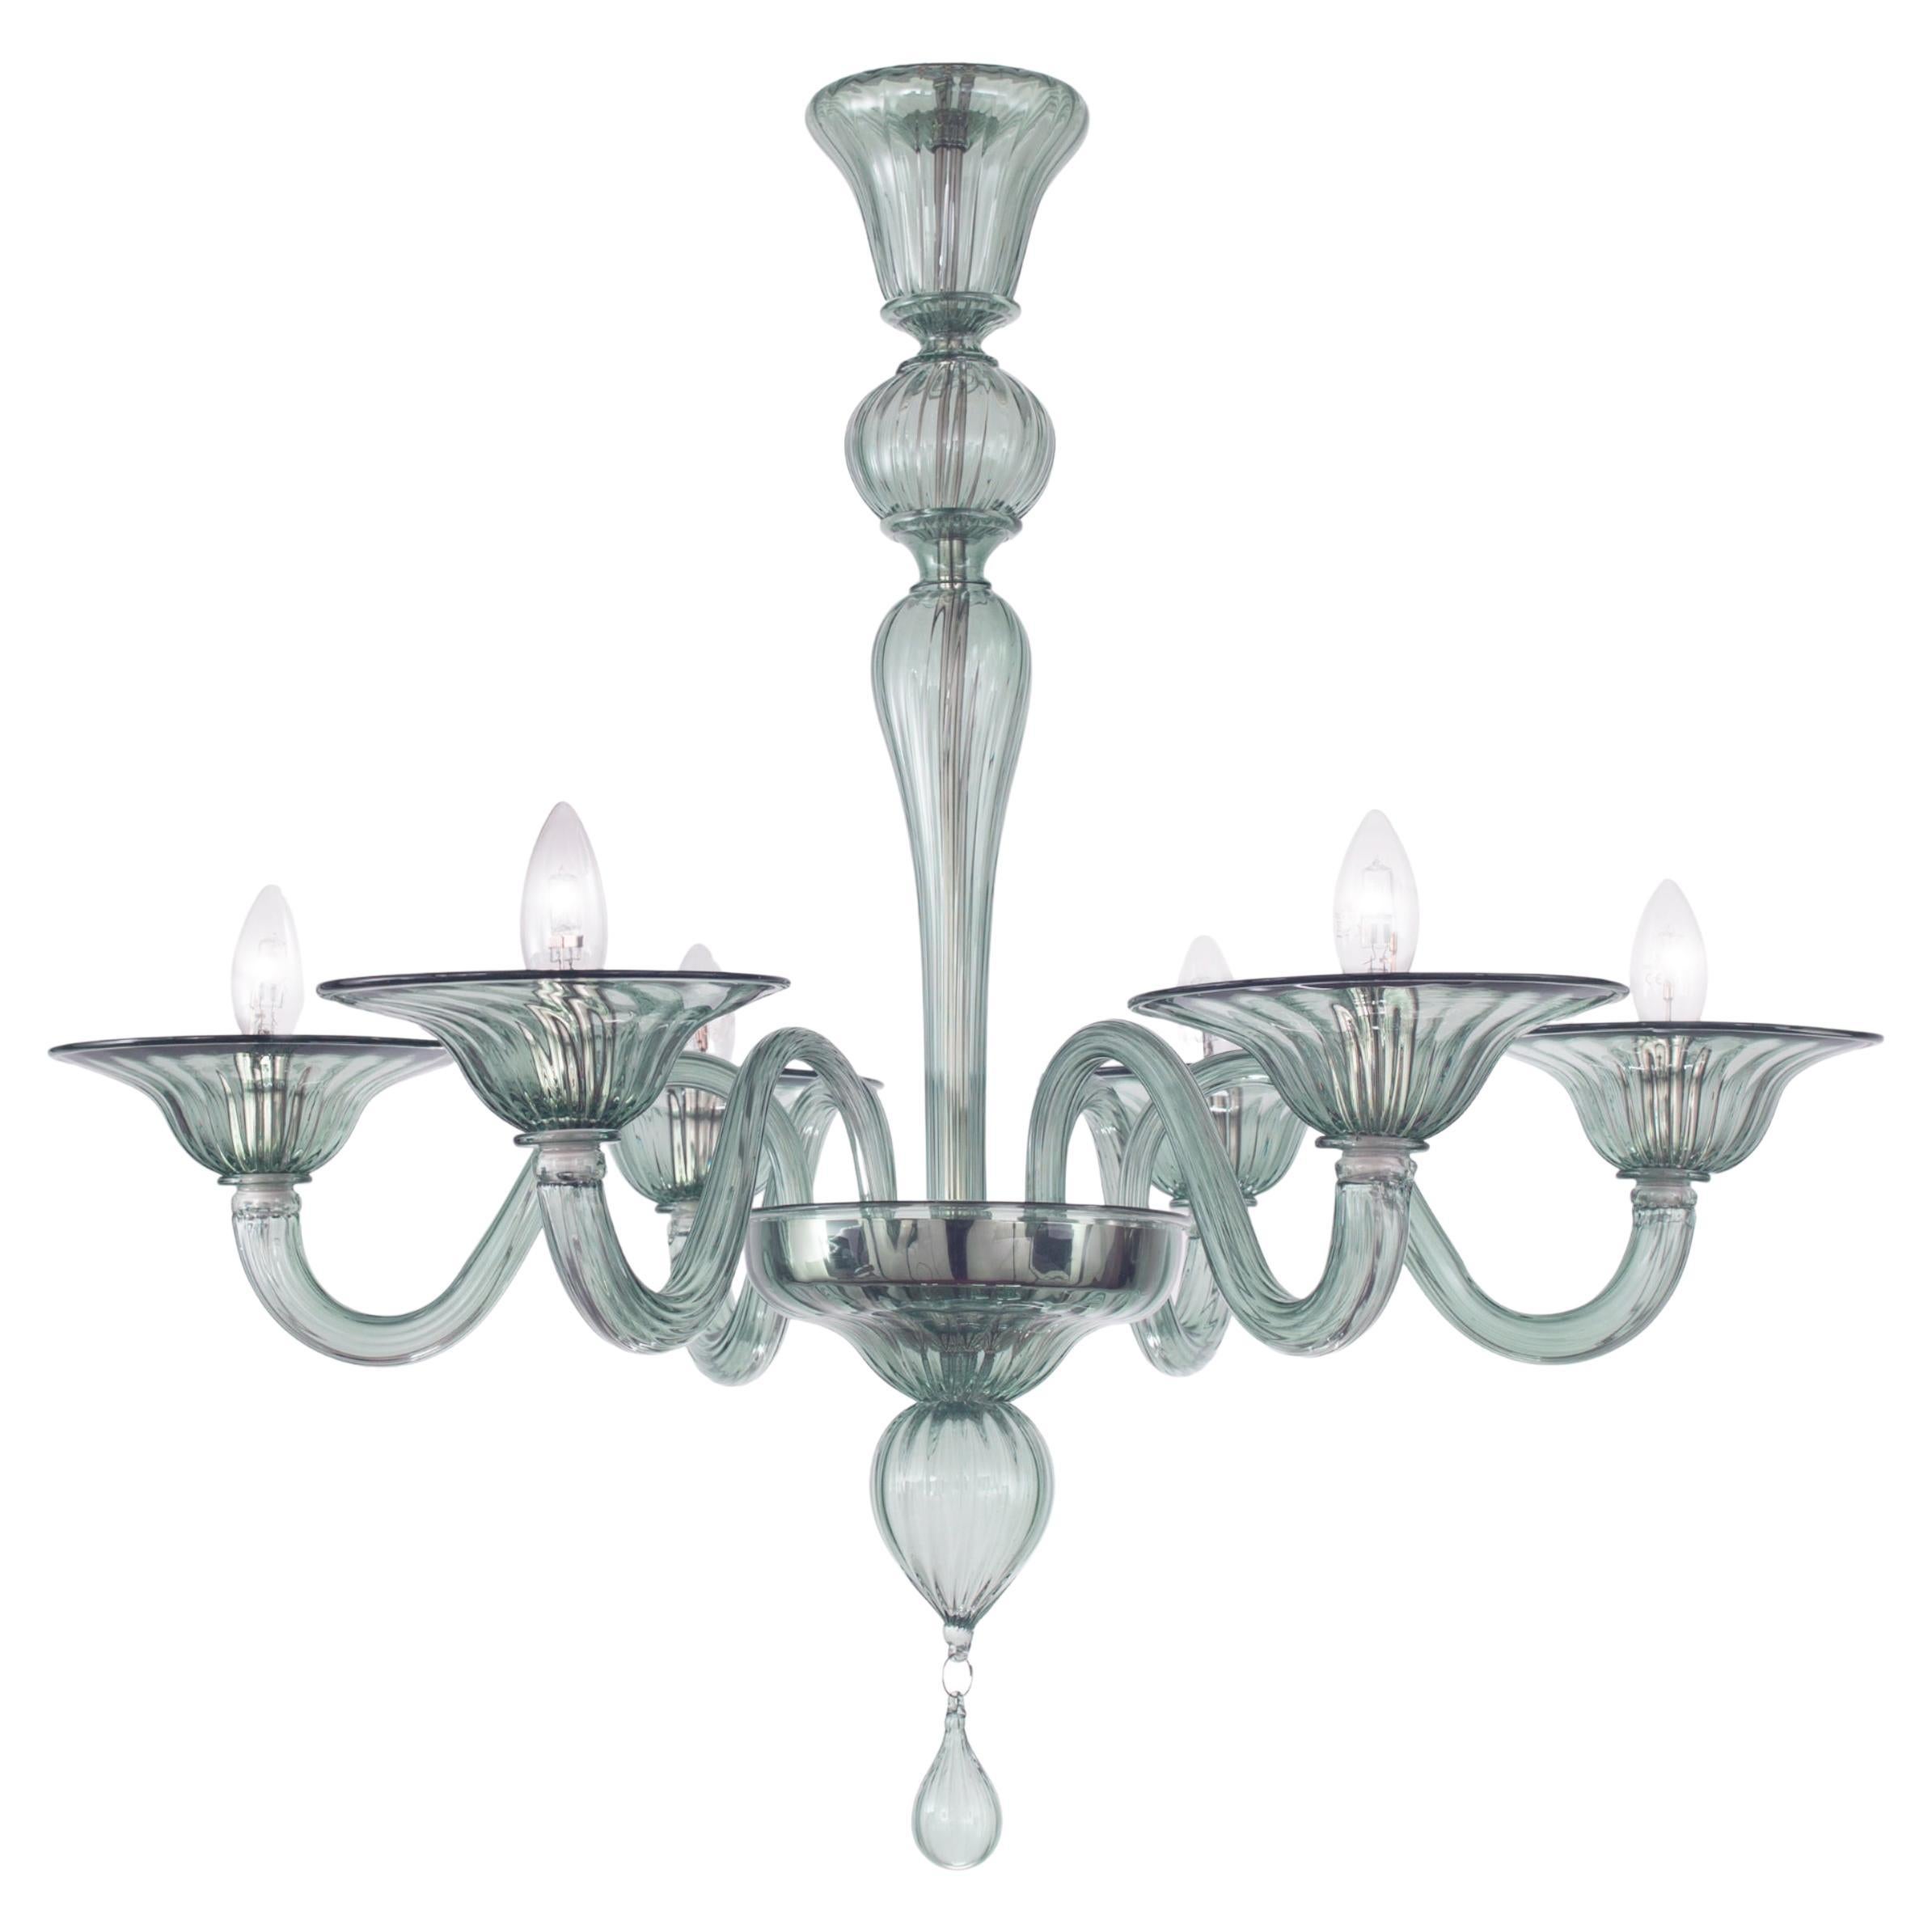 Simplicissimus Chandelier, 6 Arms grey green Murano Glass by Multiforme For Sale